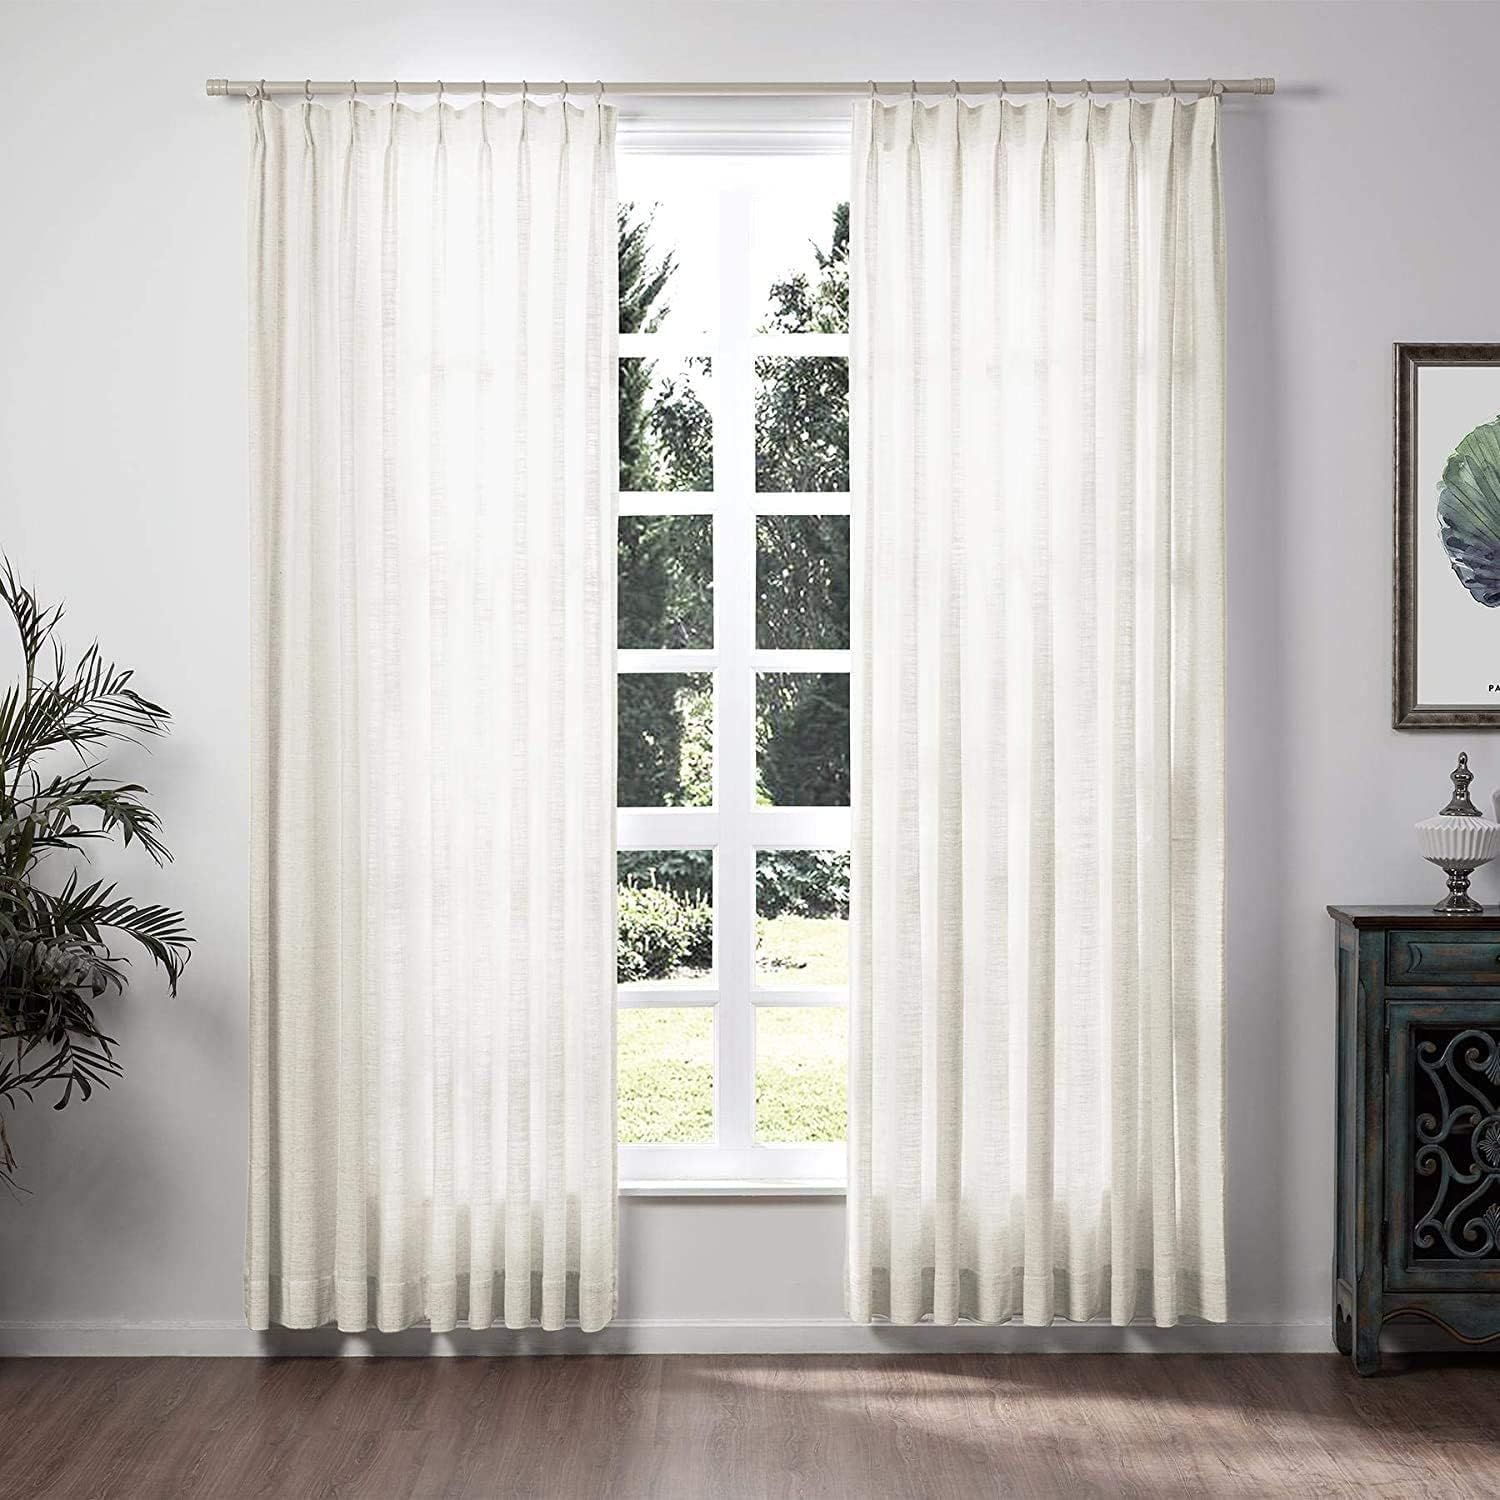 TWOPAGES 52 W x 120 L inch Pinch Pleat Darkening Drapes Faux Linen Curtains Drapery Panel for Liv... | Amazon (US)